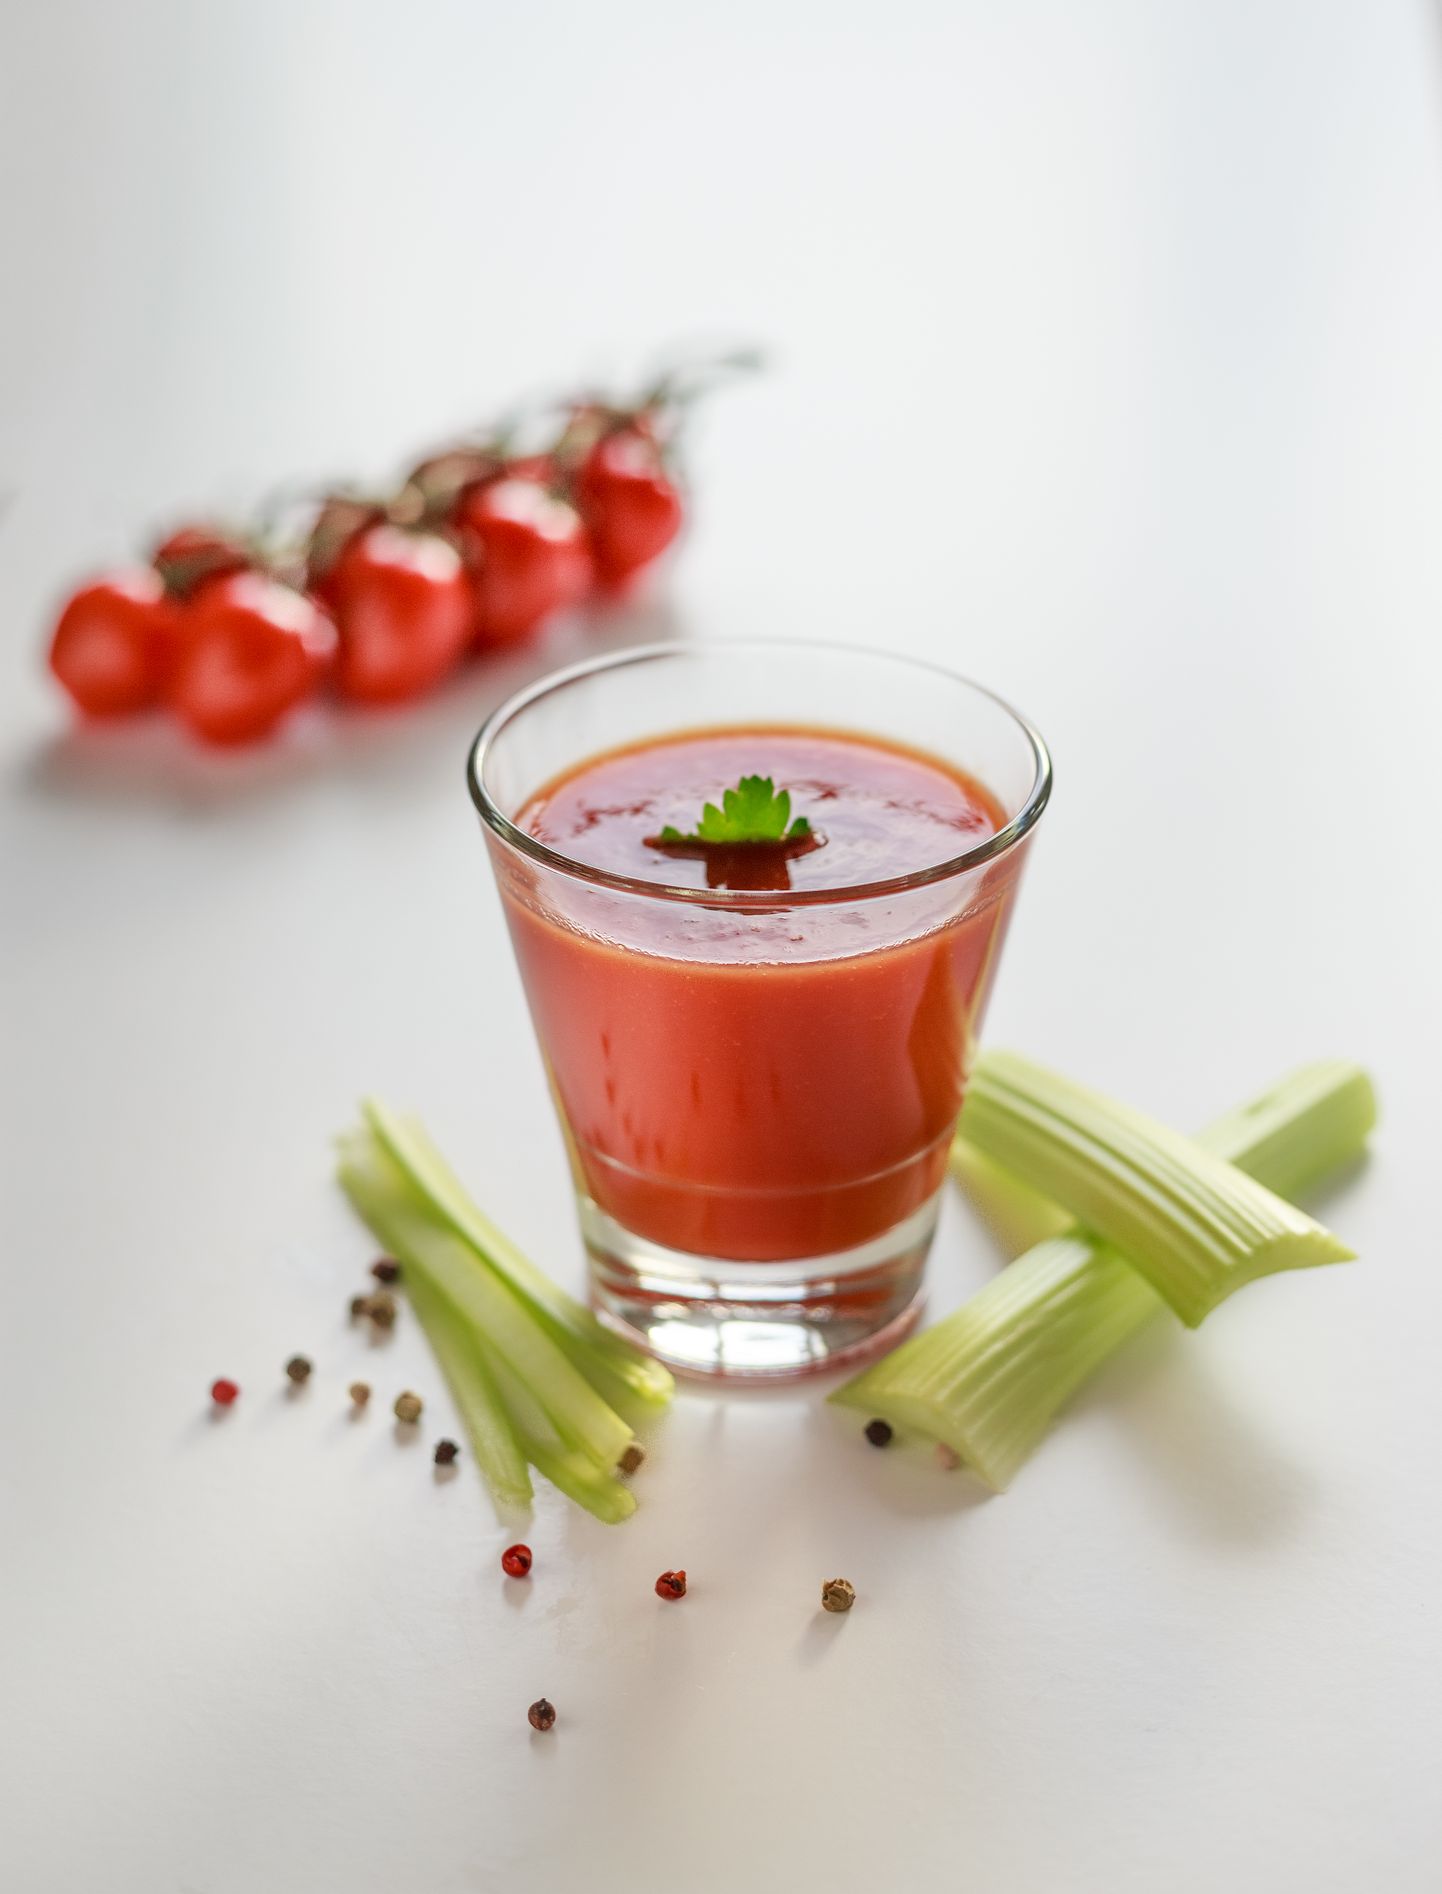 Tomato juice in a glass cup